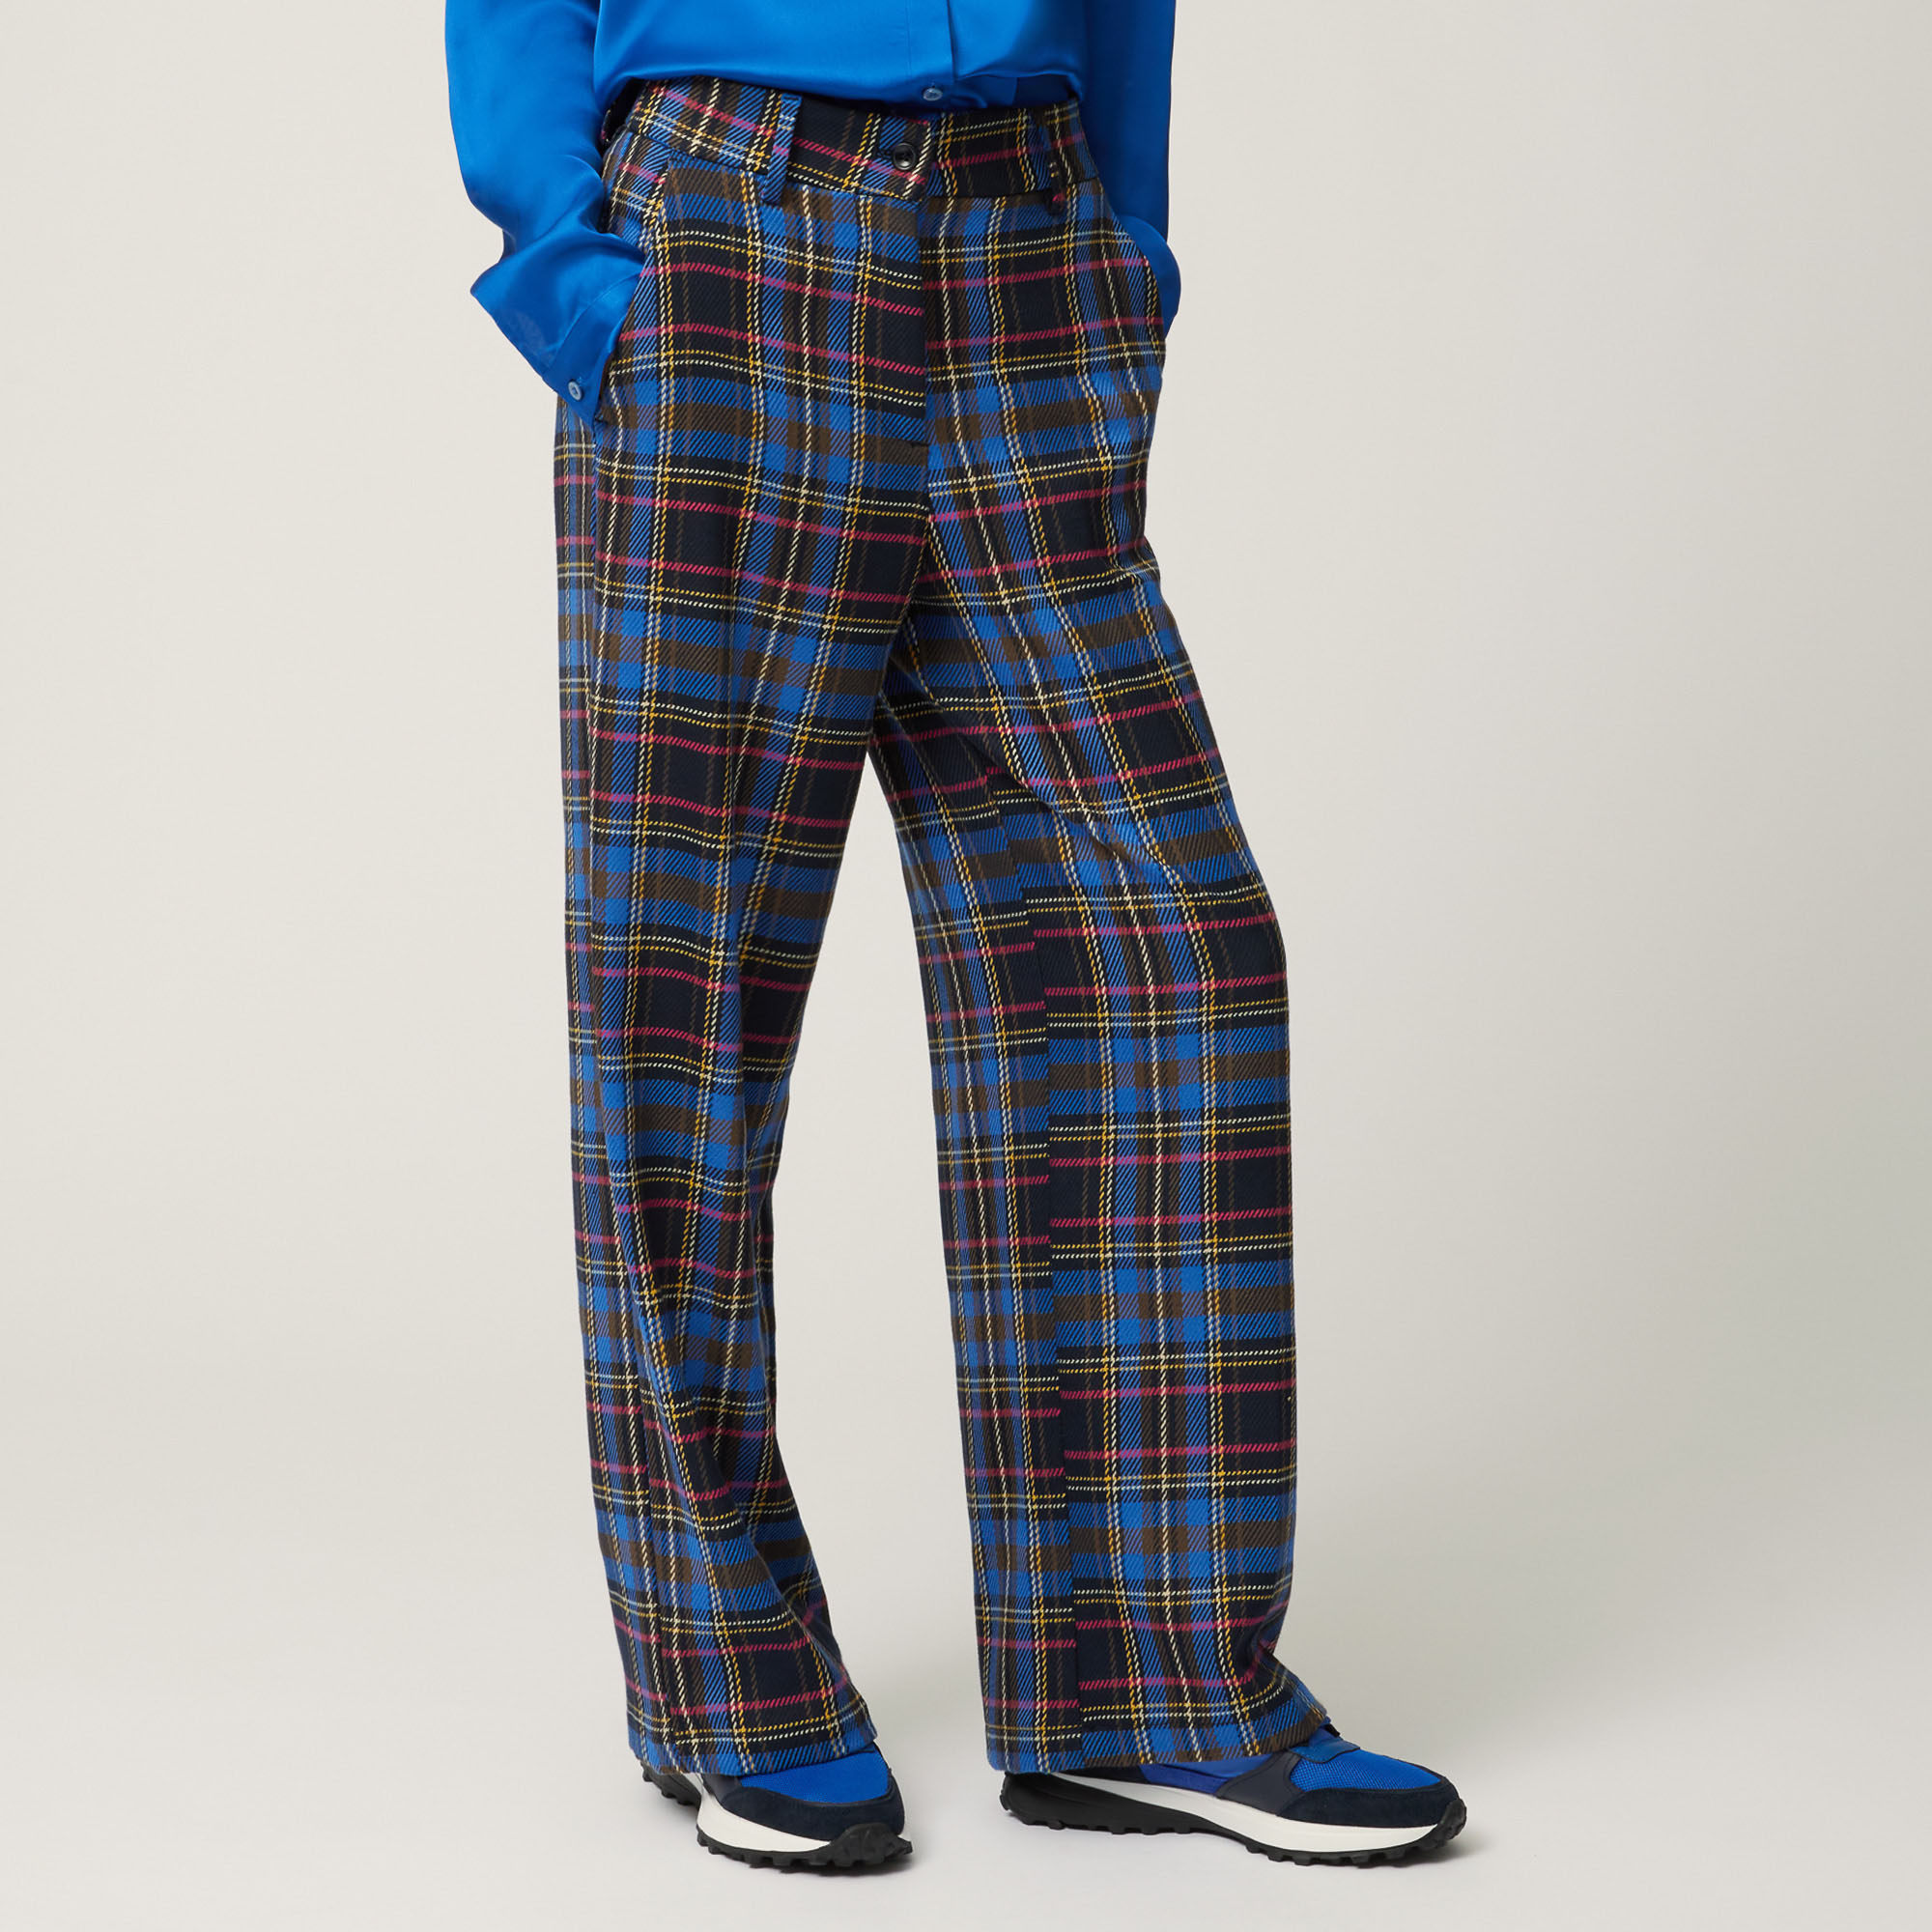 High-Waist Pants With Chequered Pattern